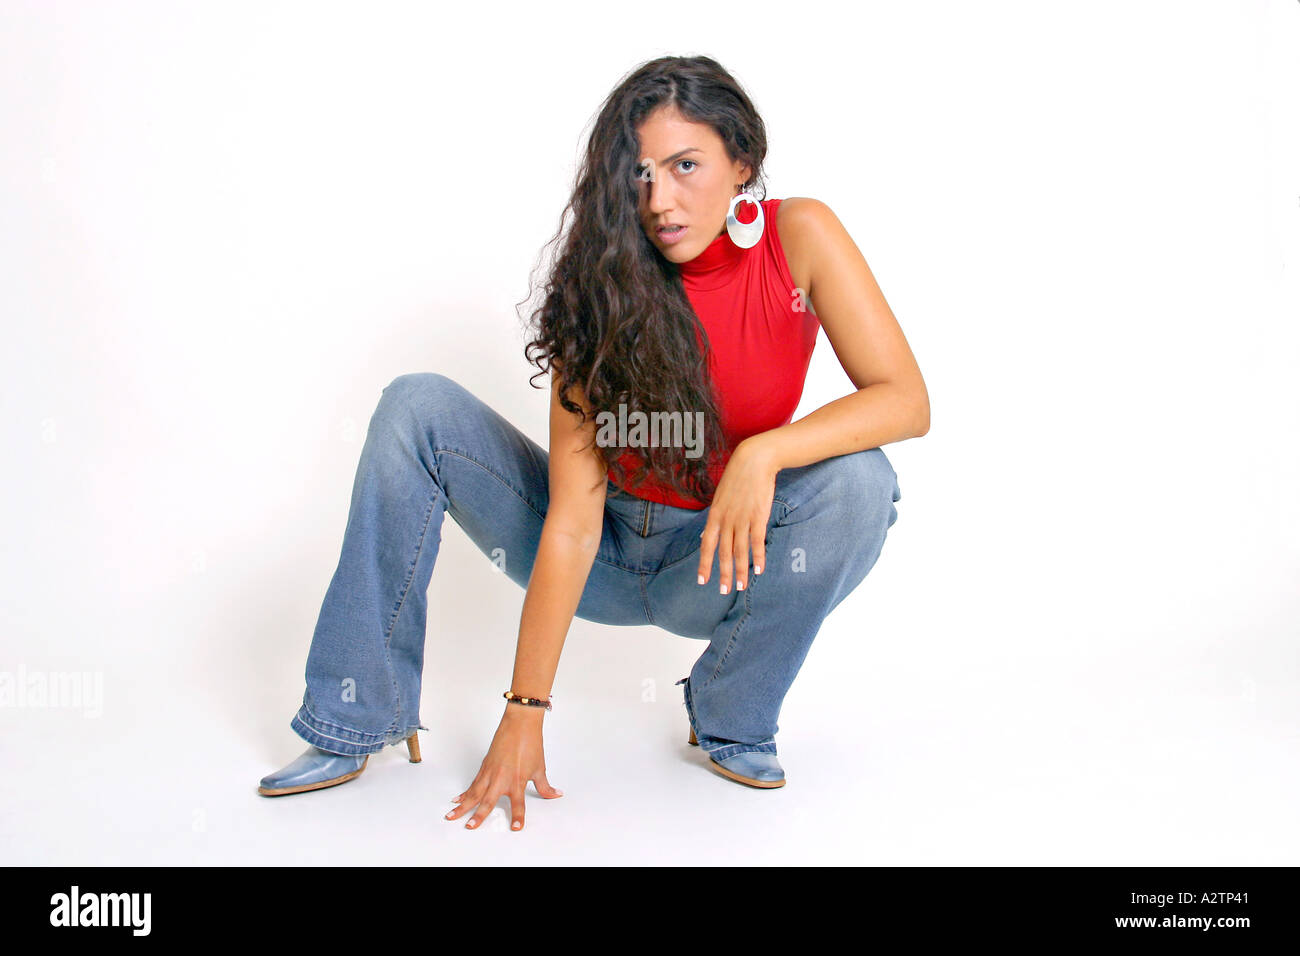 Full shot of Spanish girl with red top and jeans squatting Stock Photo